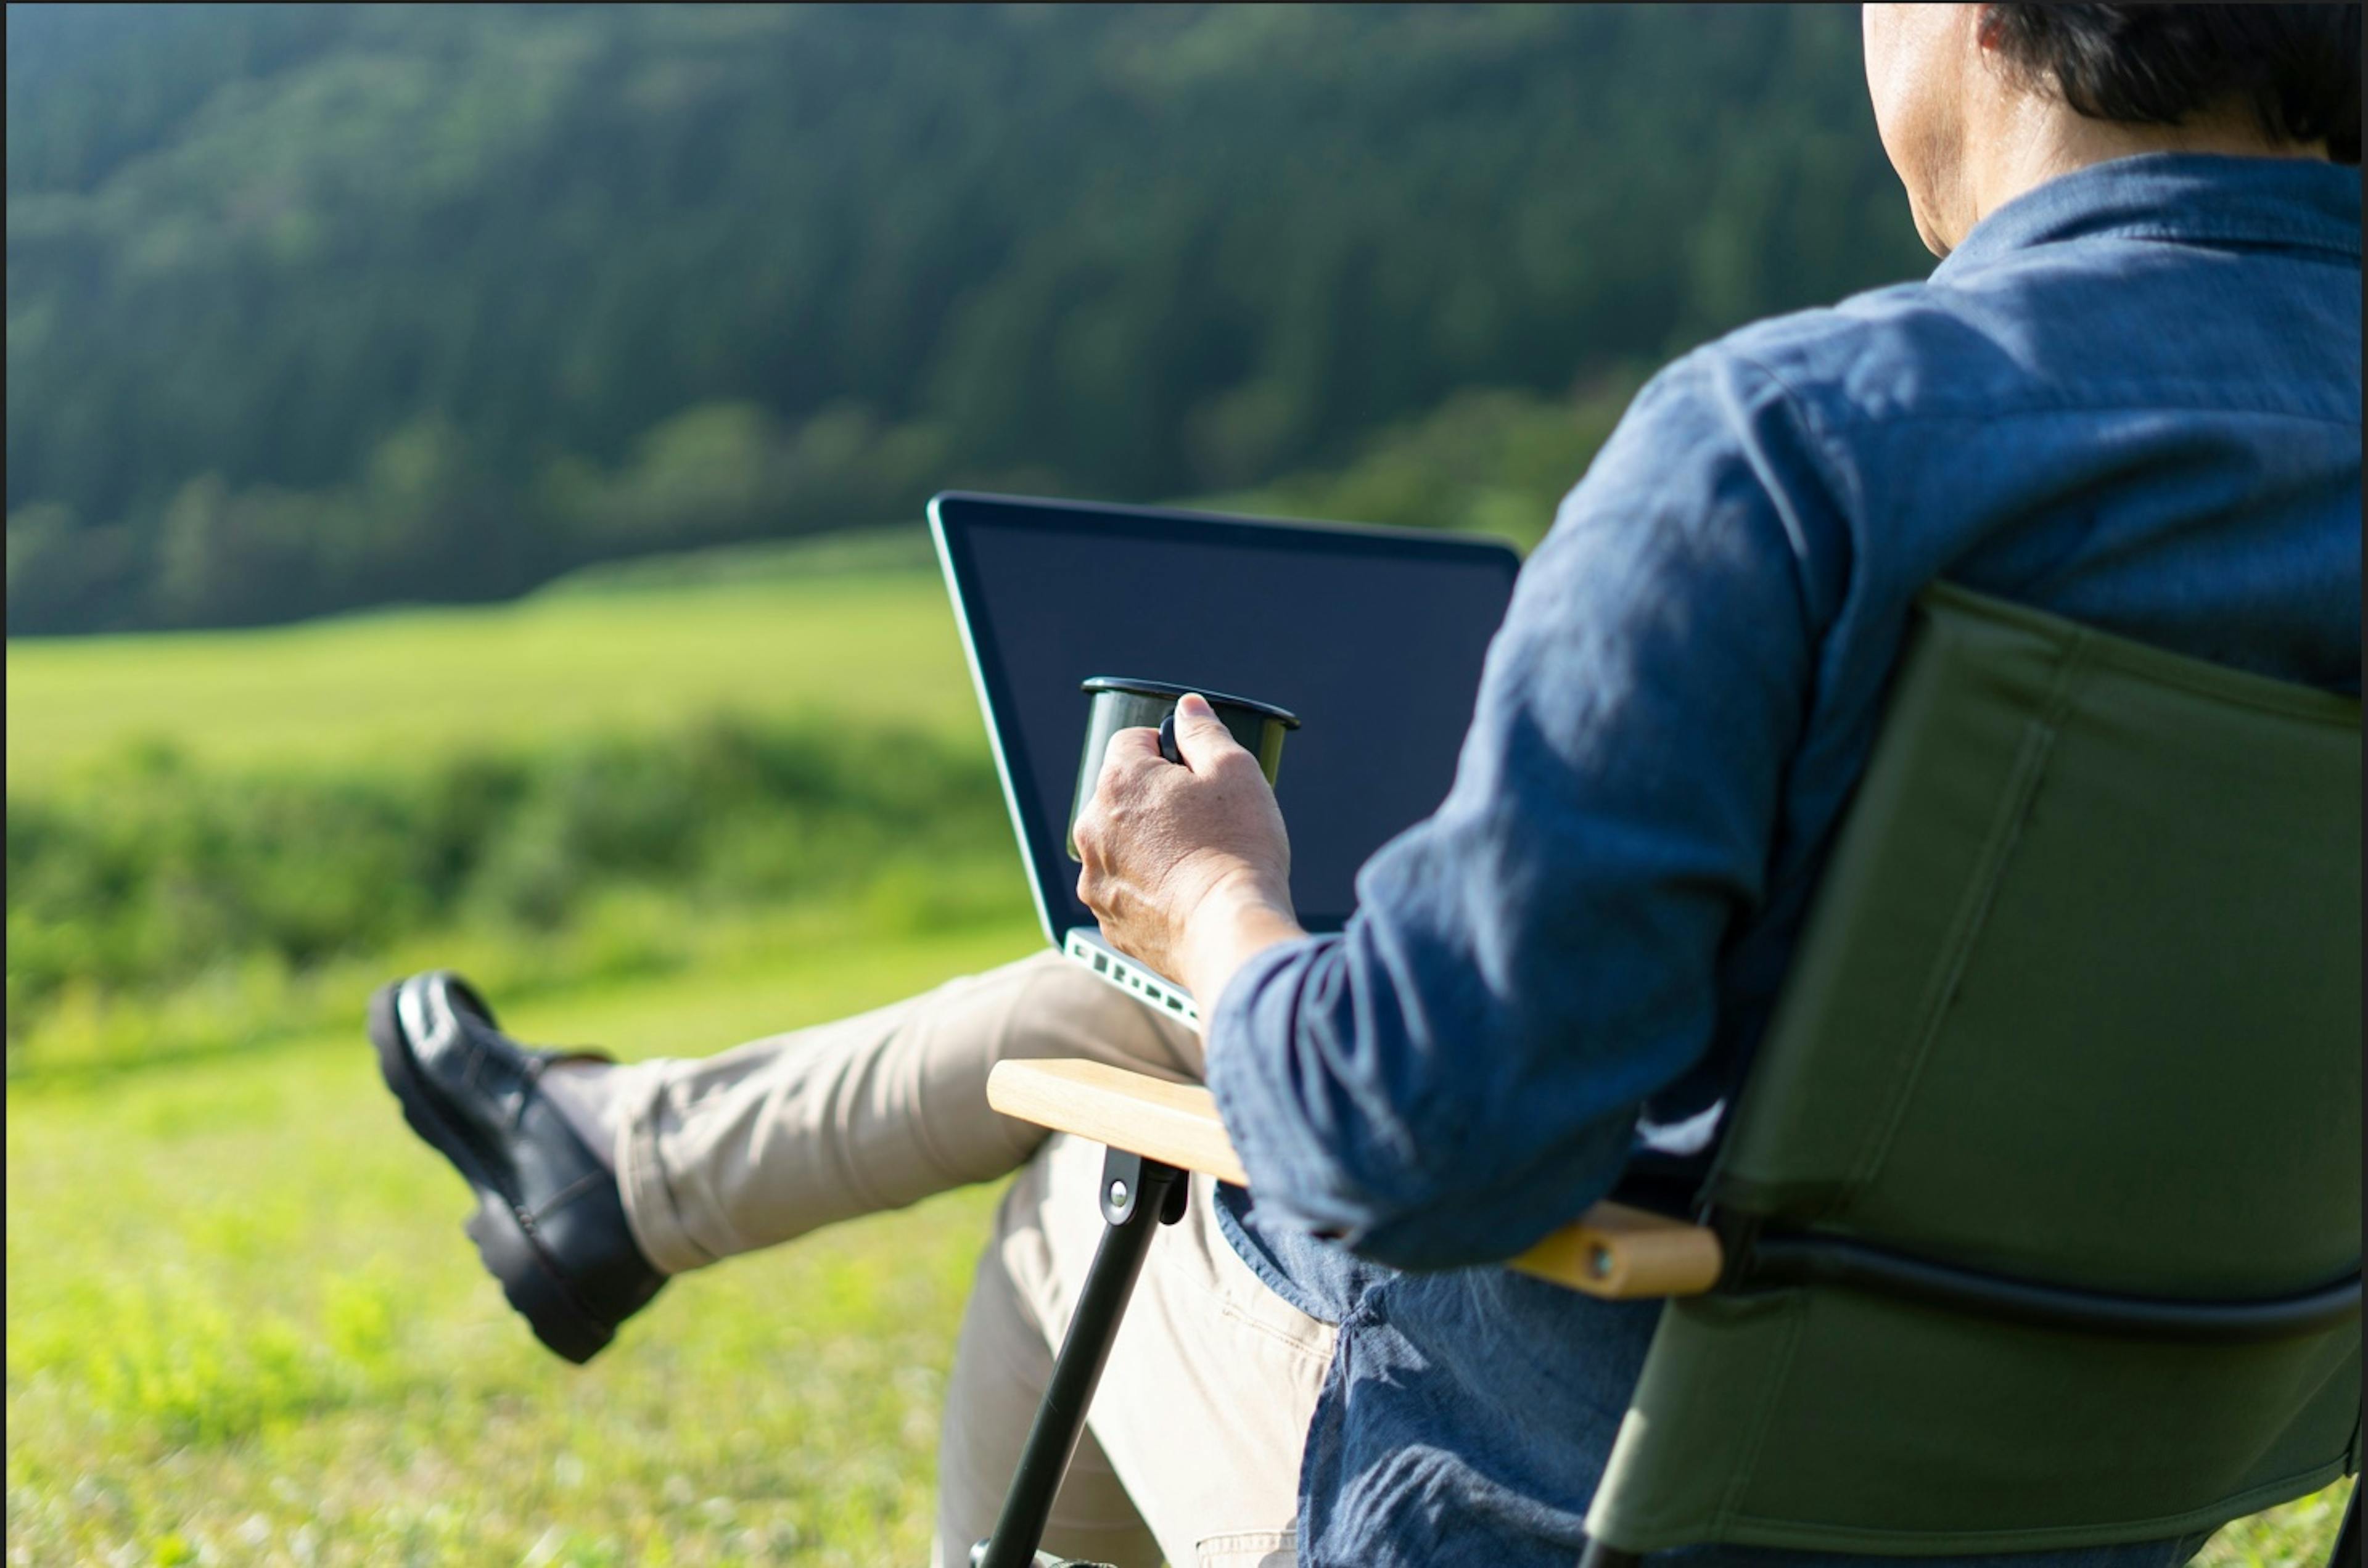 a middle aged man working from a laptop and camping chair in a meadow shows what global mobility can be